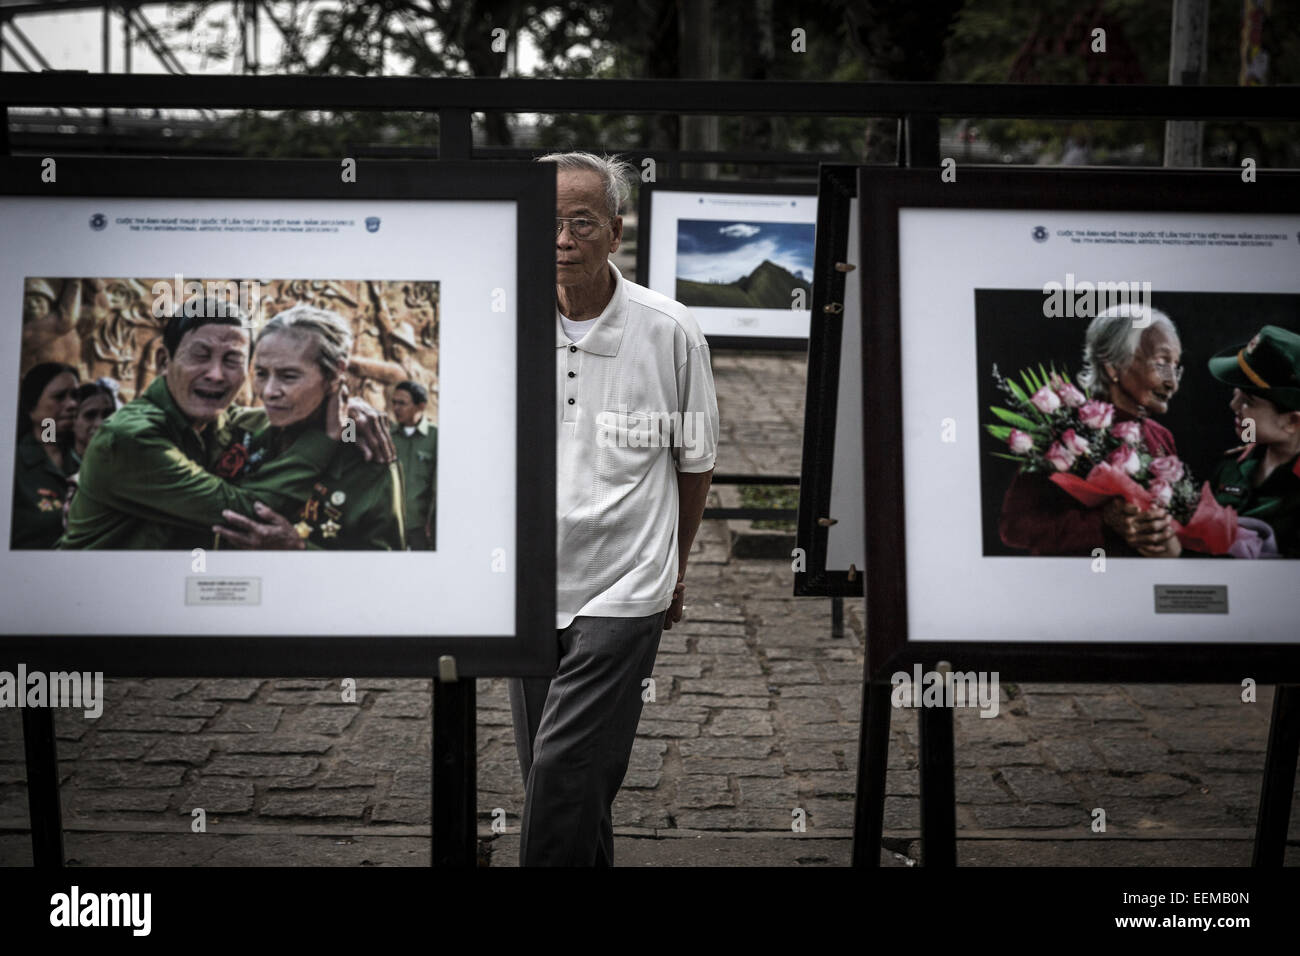 An old man visits a press photo exhibition with images of tributes from the Vietnamese government to war veterans. Stock Photo